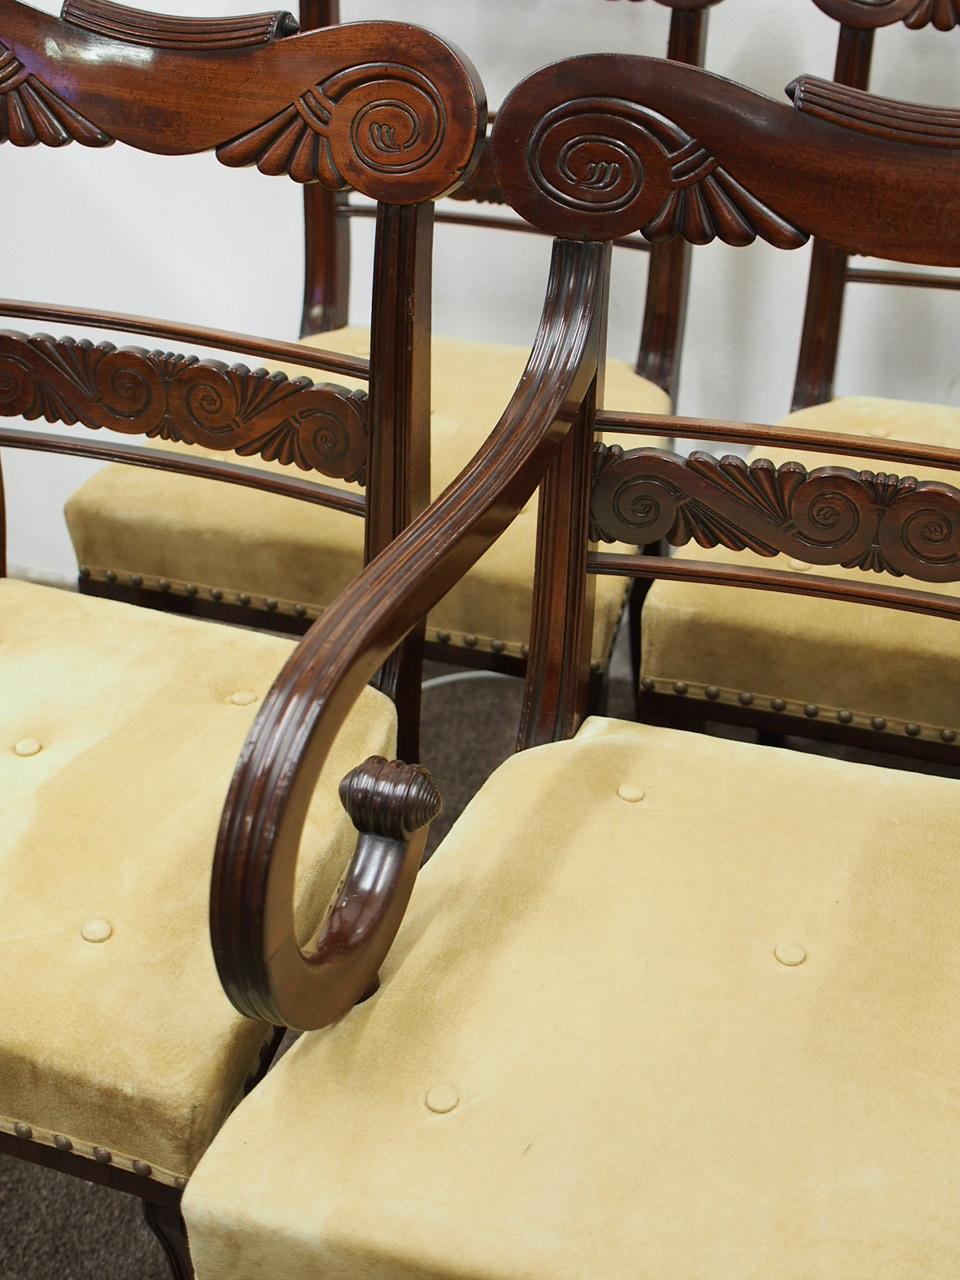 Exhibition quality set of 6 side and 2 armchairs in the style of Morrison and Co. Edinburgh, circa 1820. The chairs have a shaped carved top rail, curved shoulders and finish with a spiral carving and c scroll in the centre. There is two reeded